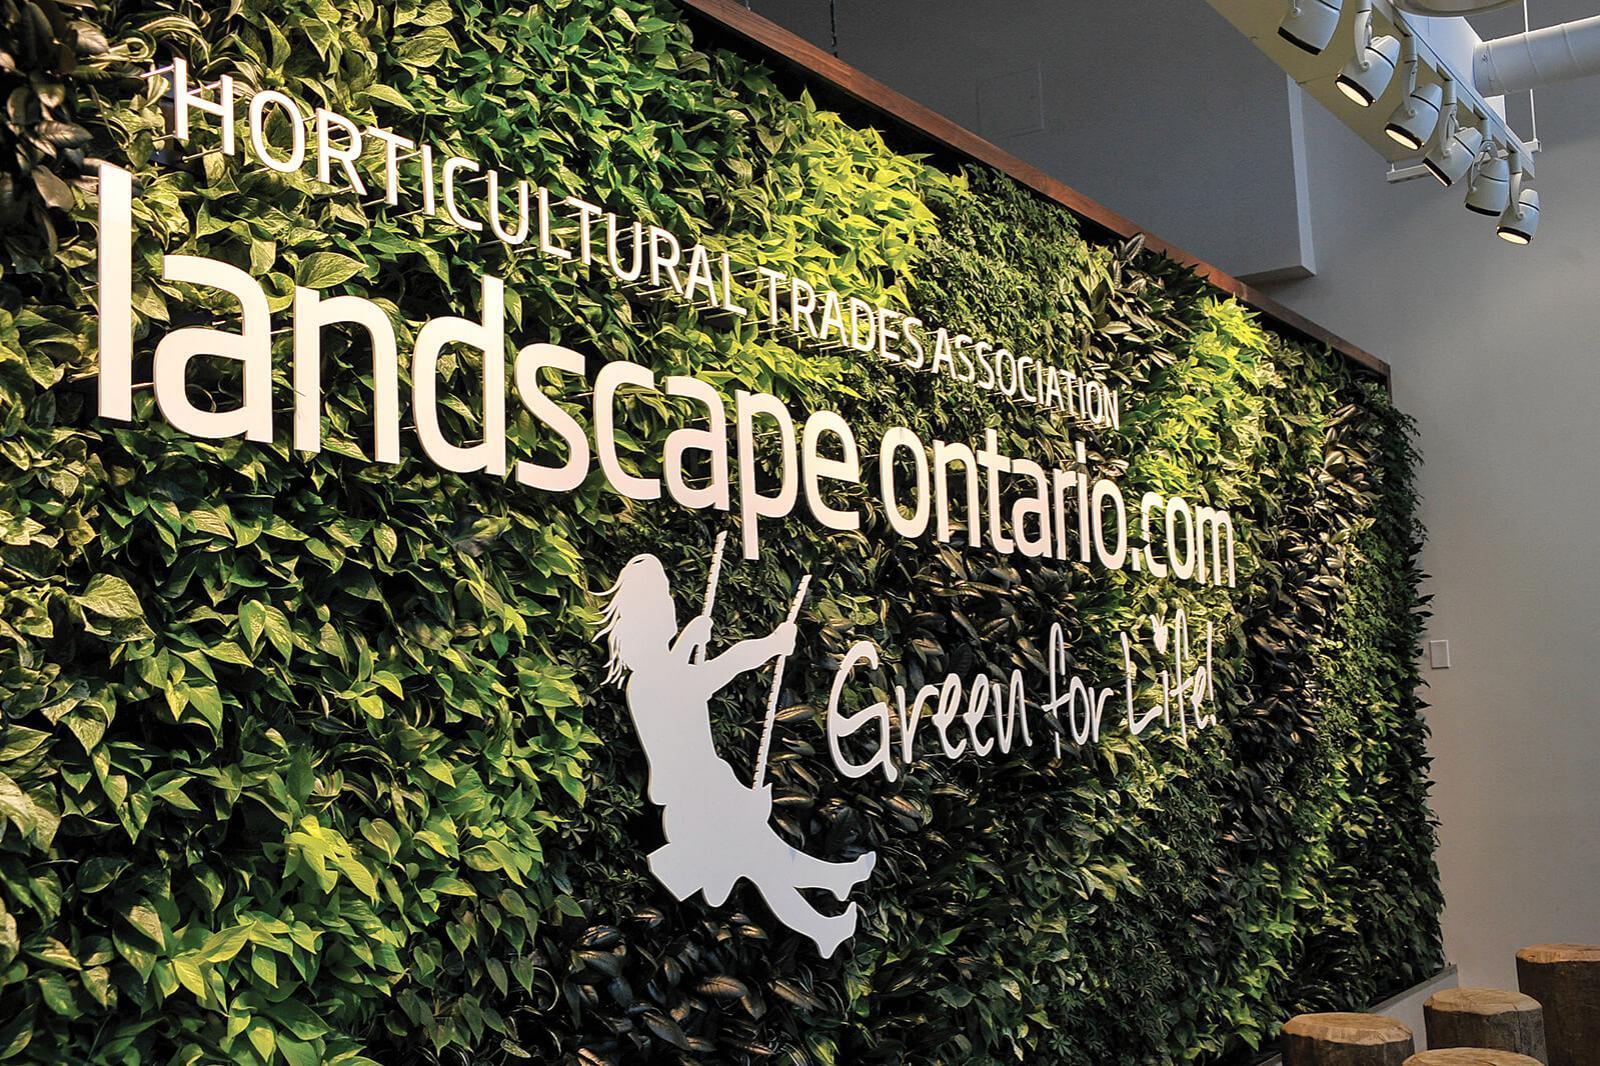 Landscape Ontario officially reopens in Milton